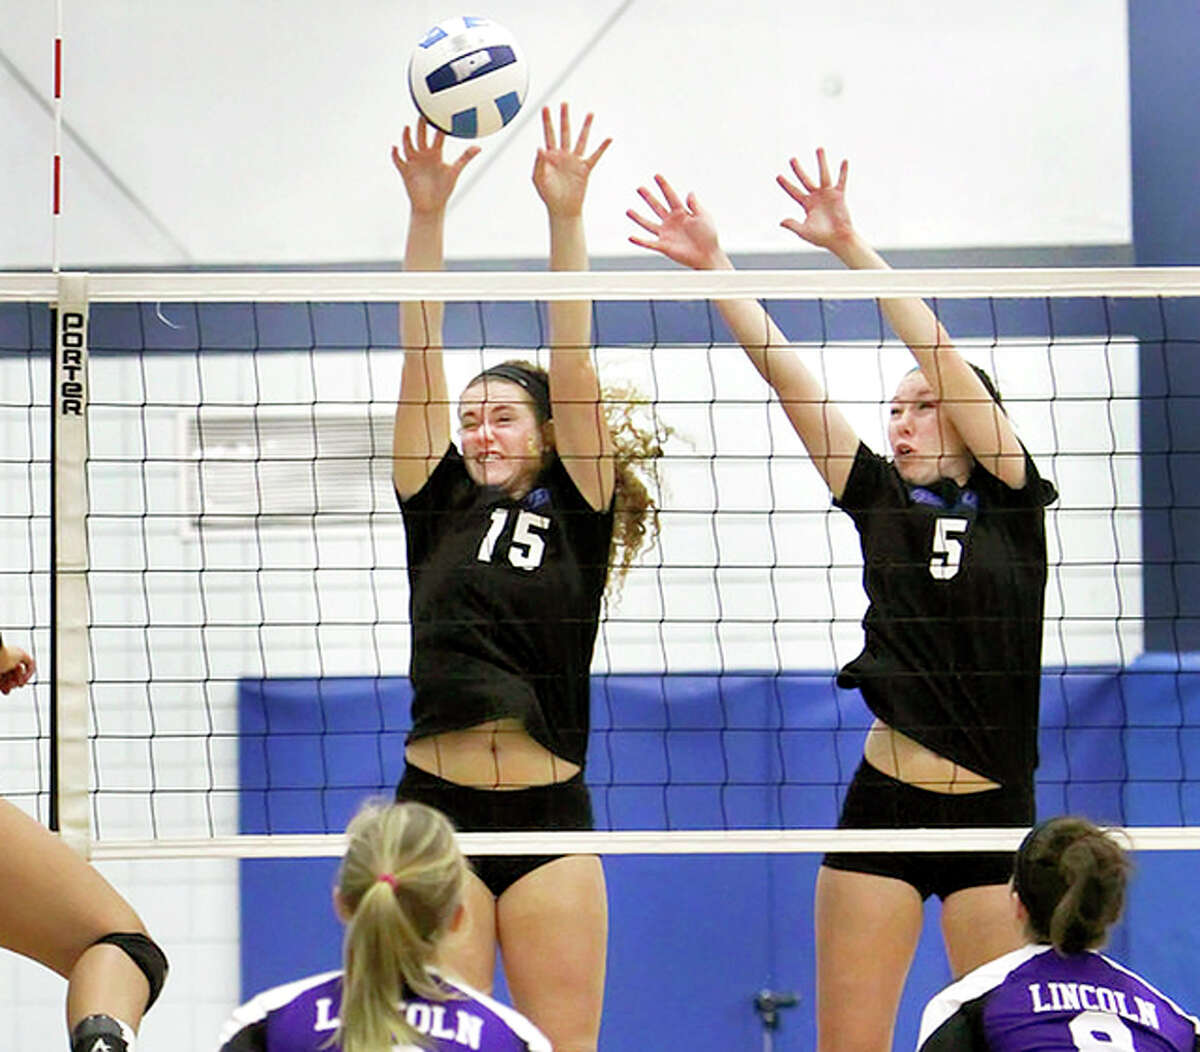 LCCC’s Bailey McGuire, left, a freshman from Roxana, and teammate Denae White, a freshman from New Athens, go up at the net during Region 24 Tournament action against Lincoln Wednesday at LCCC. The Trailblazers won and will take on No. 1-ranked Parkland in the semifinals Saturday at Lincoln Land CC in Springfield.